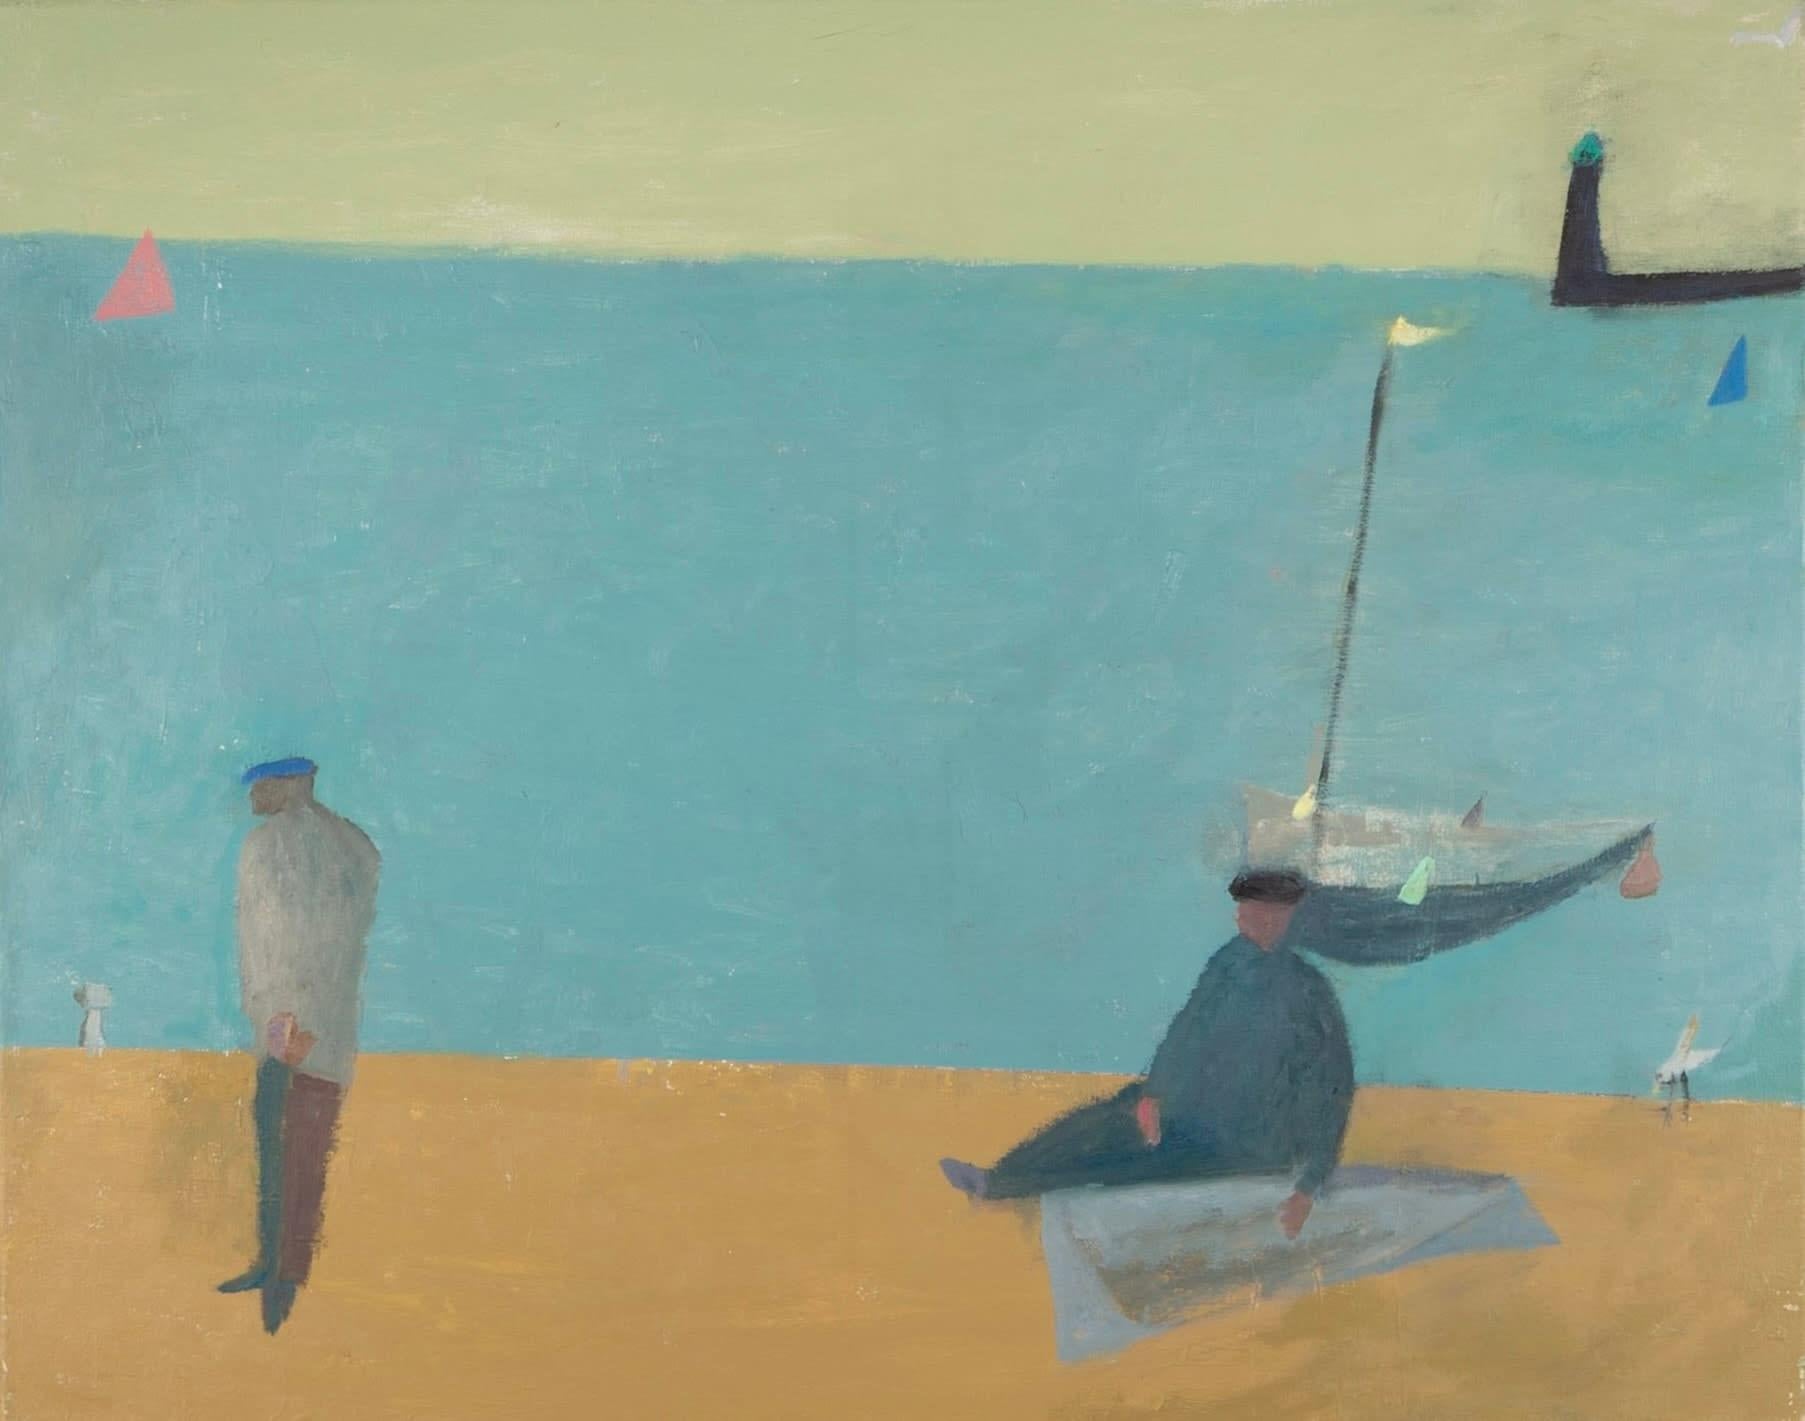 Two Figures on a Harbourside, Oil on Canvas Painting by Nicholas Turner B. 1972

Additional information:
Medium: Oil on canvas
Dimensions: 61 x 76.2 cm
24 x 30 in
Signed verso

Nicholas Turner is a painter of quiet compositions that are beautifully